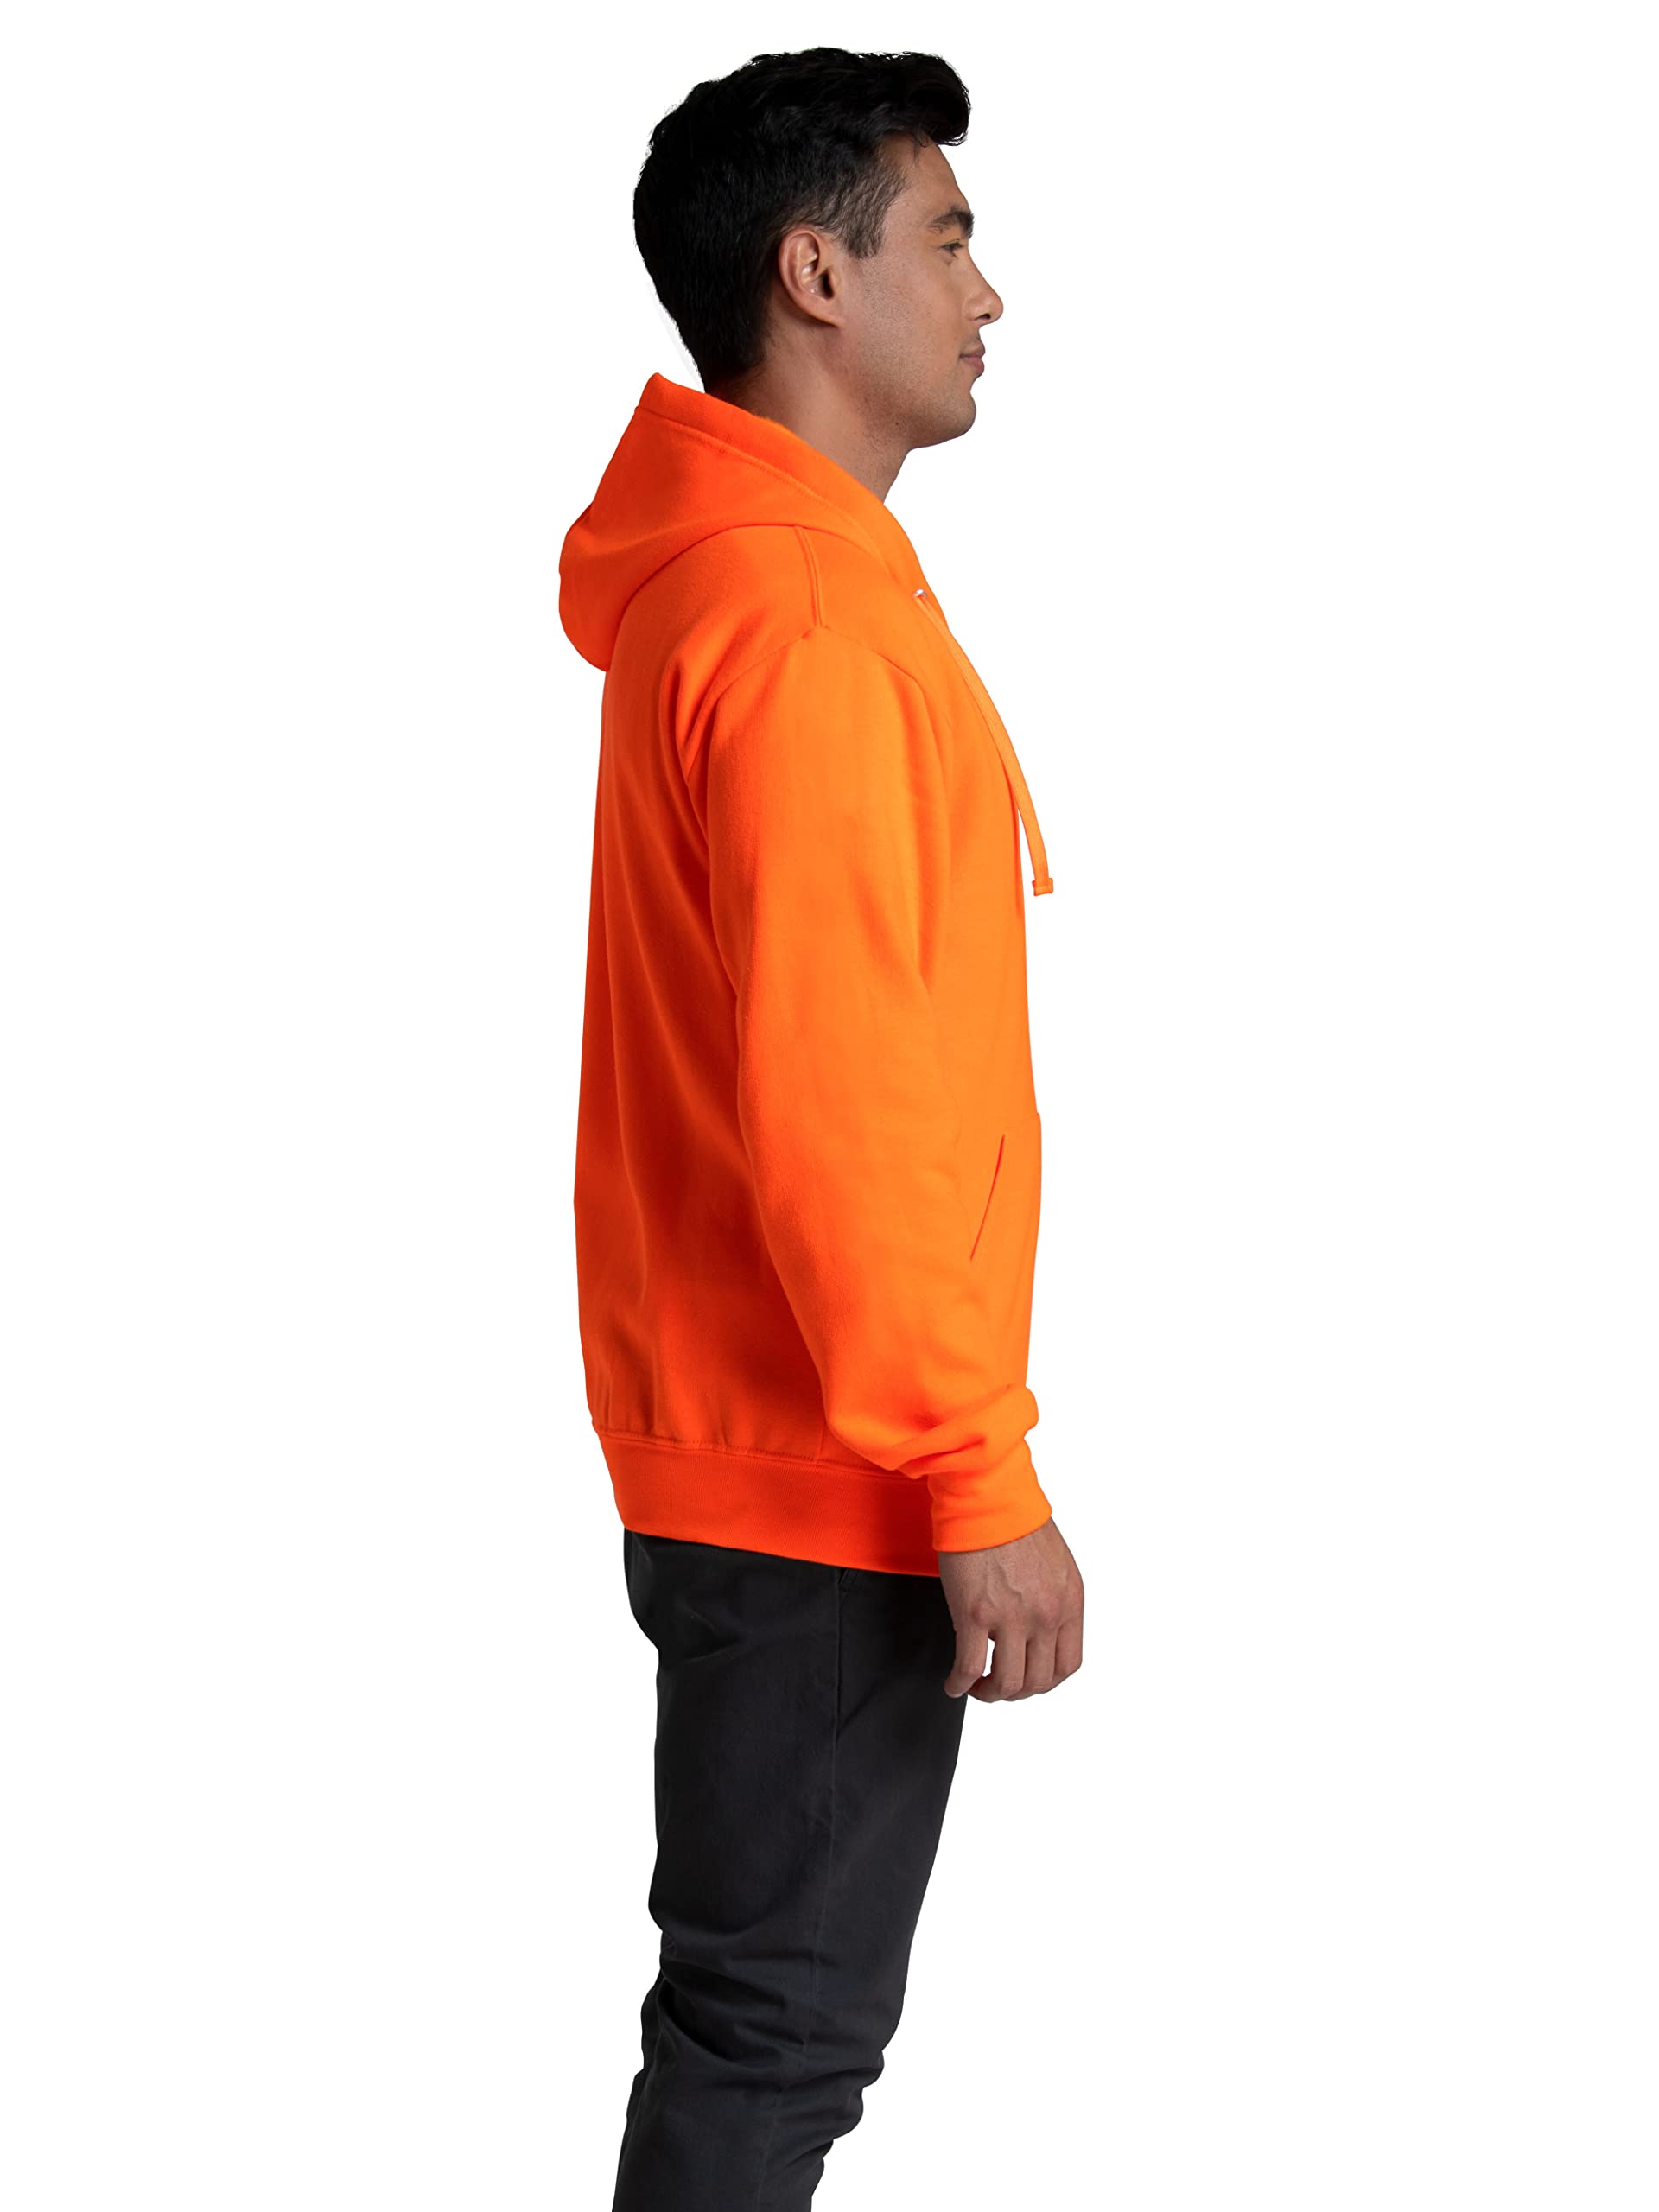 Fruit of the Loom Eversoft Fleece Hoodies, Pullover & Full Zip, Moisture Wicking & Breathable, Sizes S-4x